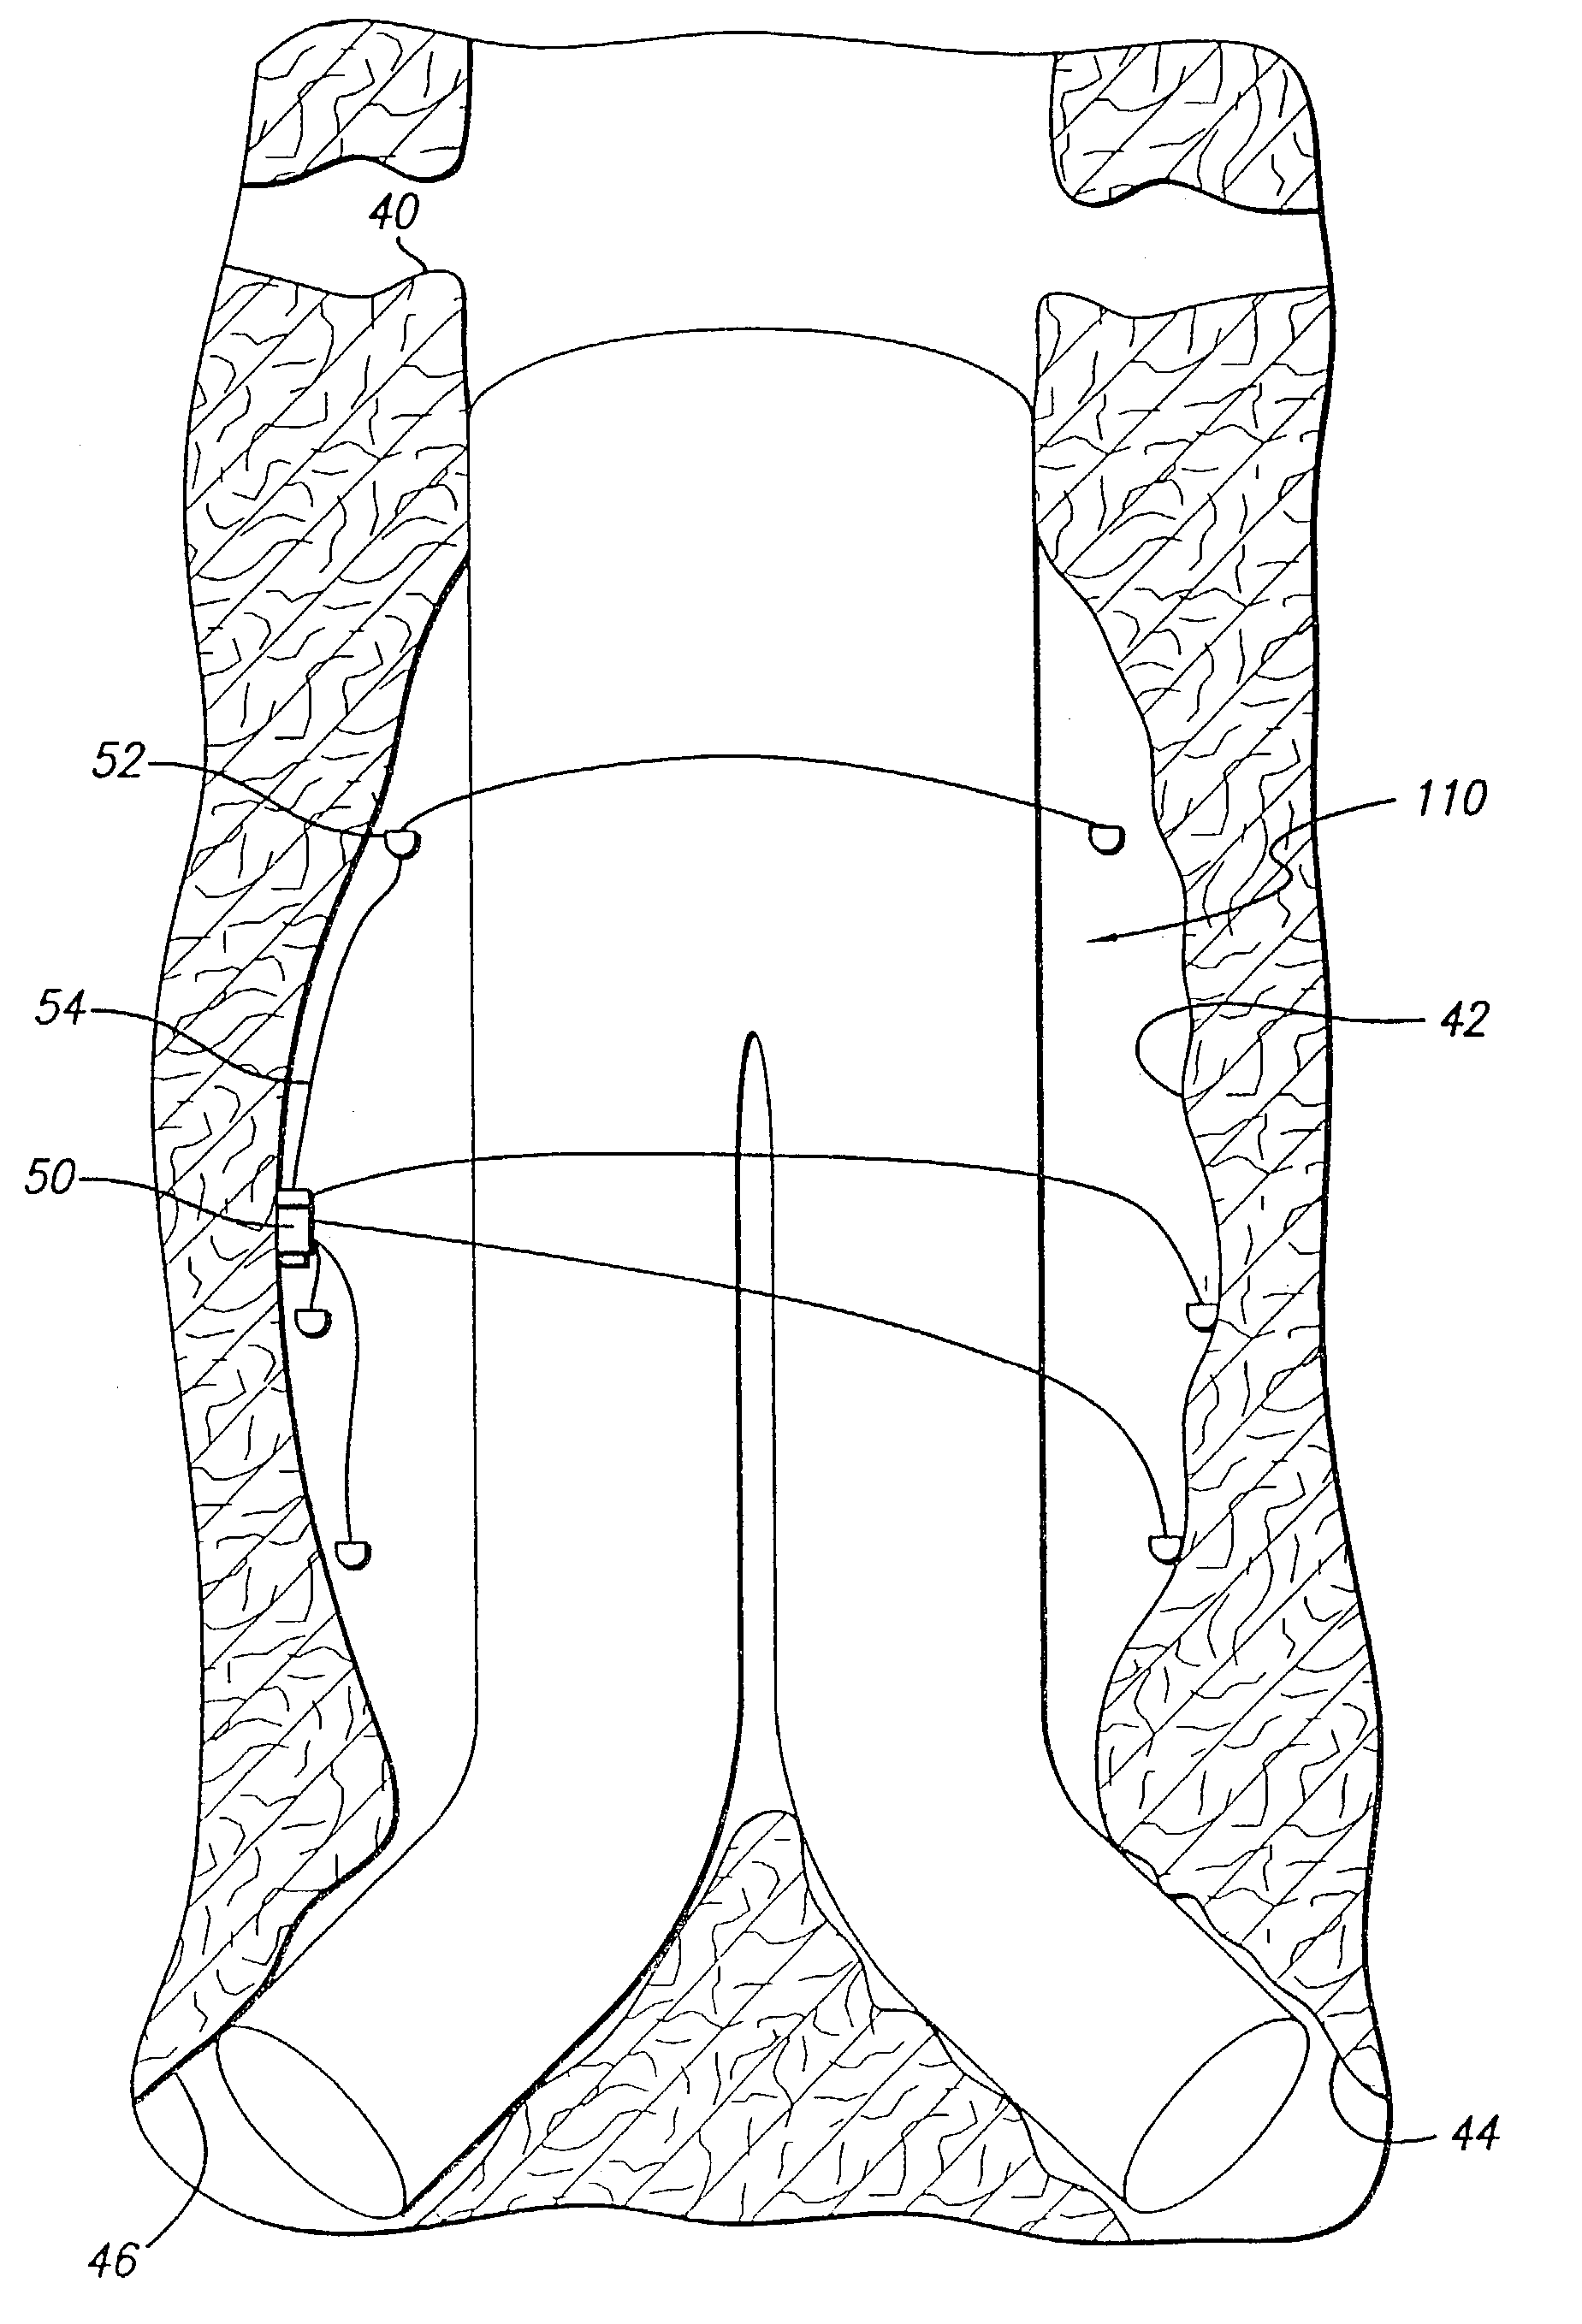 Endovascular graft with separable sensors